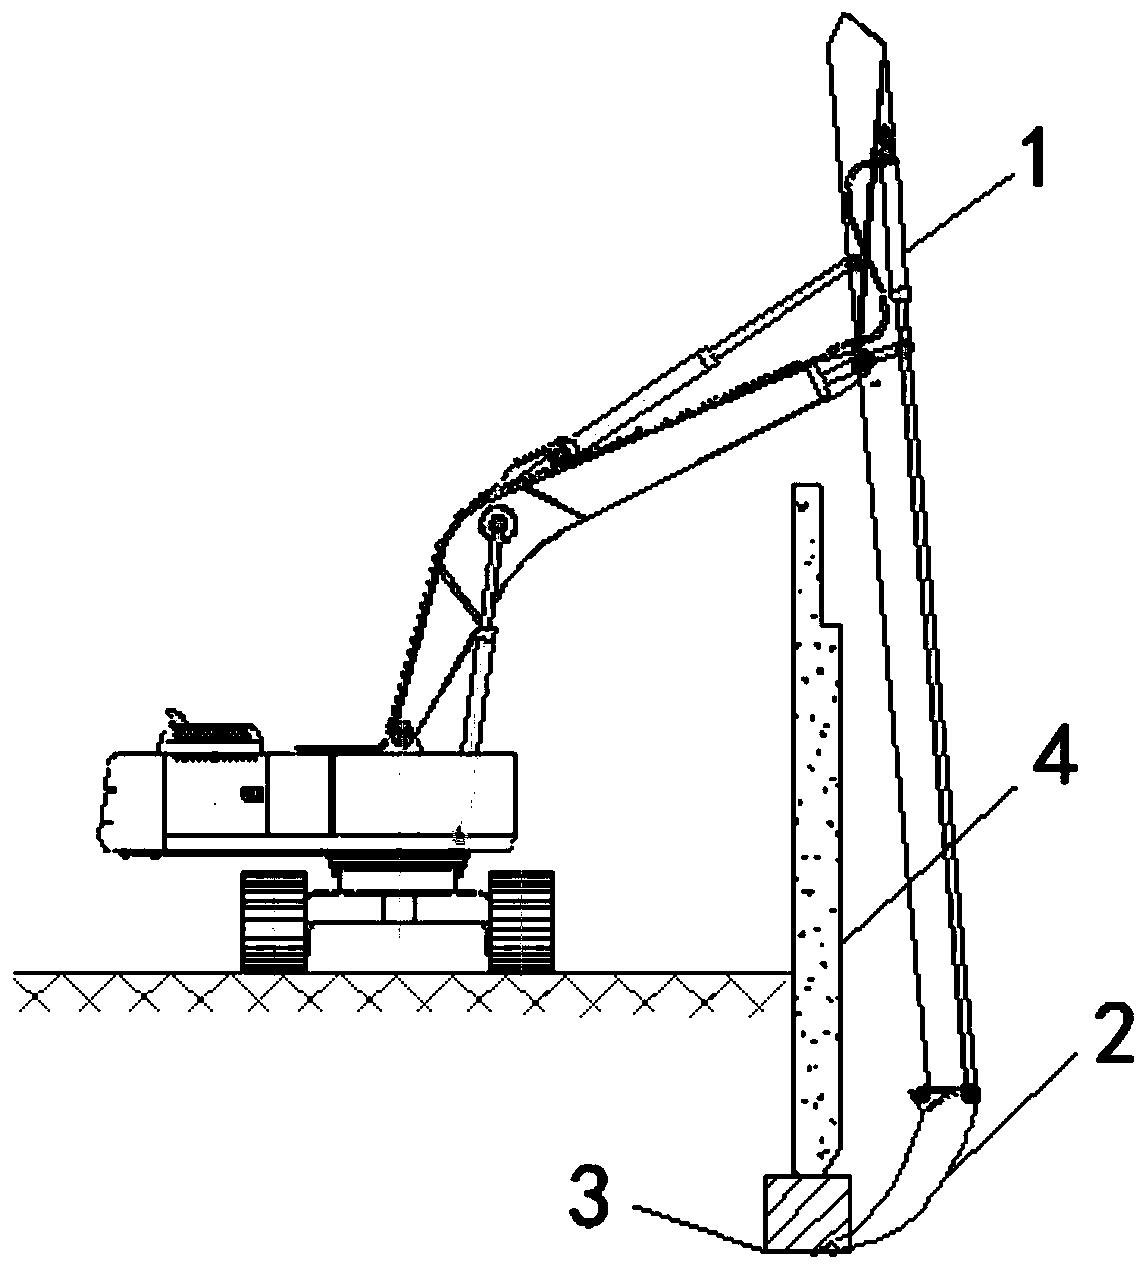 Device for breaking underground obstacle under deep excavation conditions